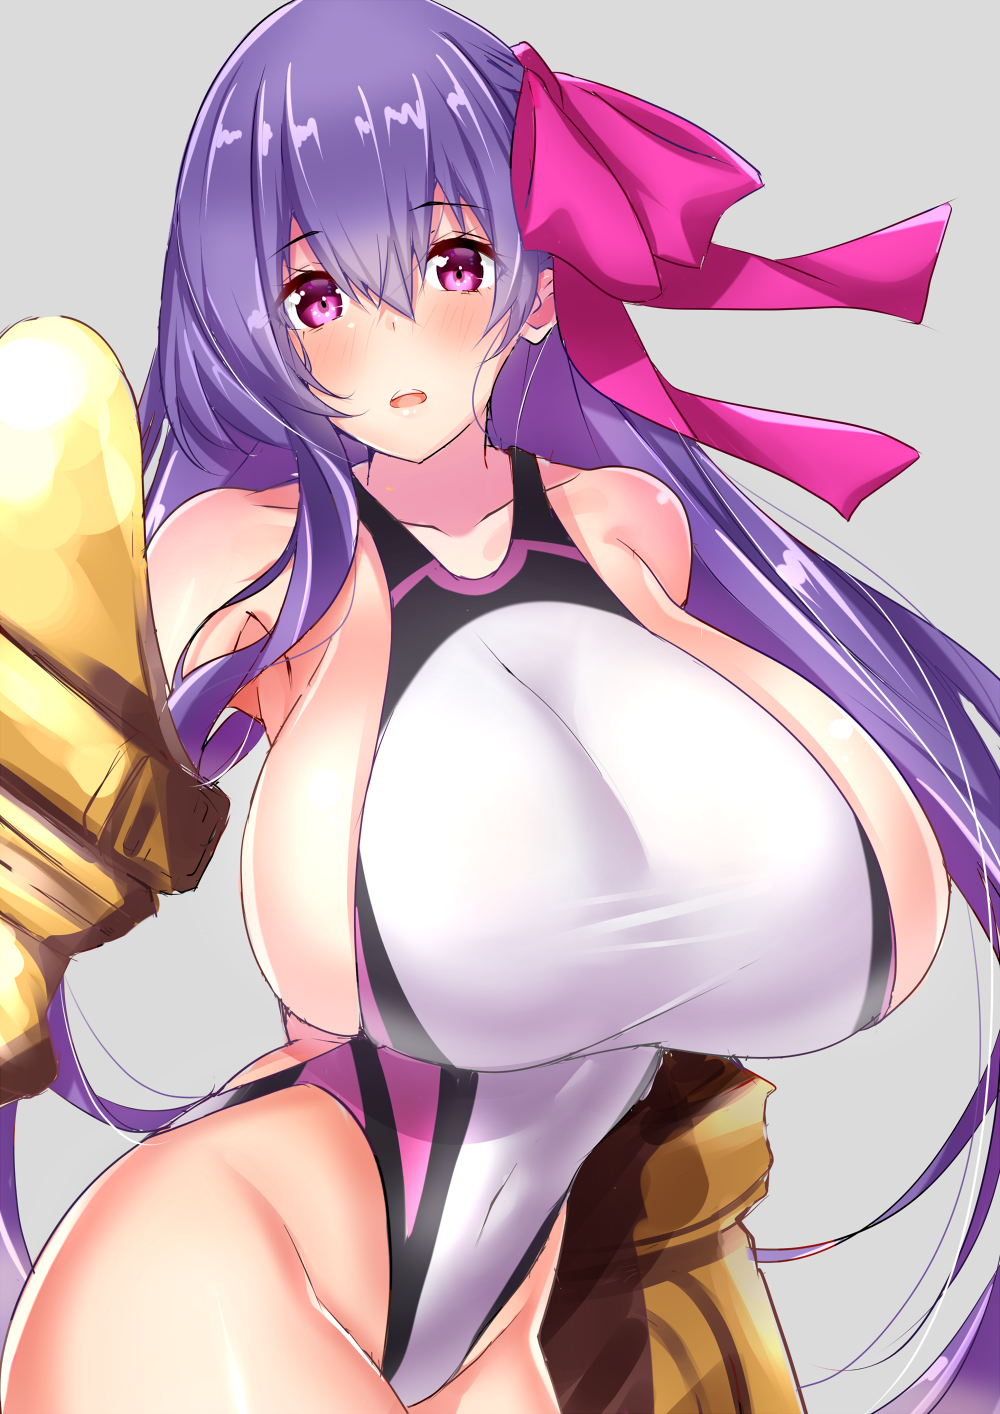 Anime 1000x1414 anime Fate series Fate/Extra Fate/Extra CCC Fate/Grand Order Passionlip long hair purple hair big boobs solo artwork digital art fan art huge breasts anime girls